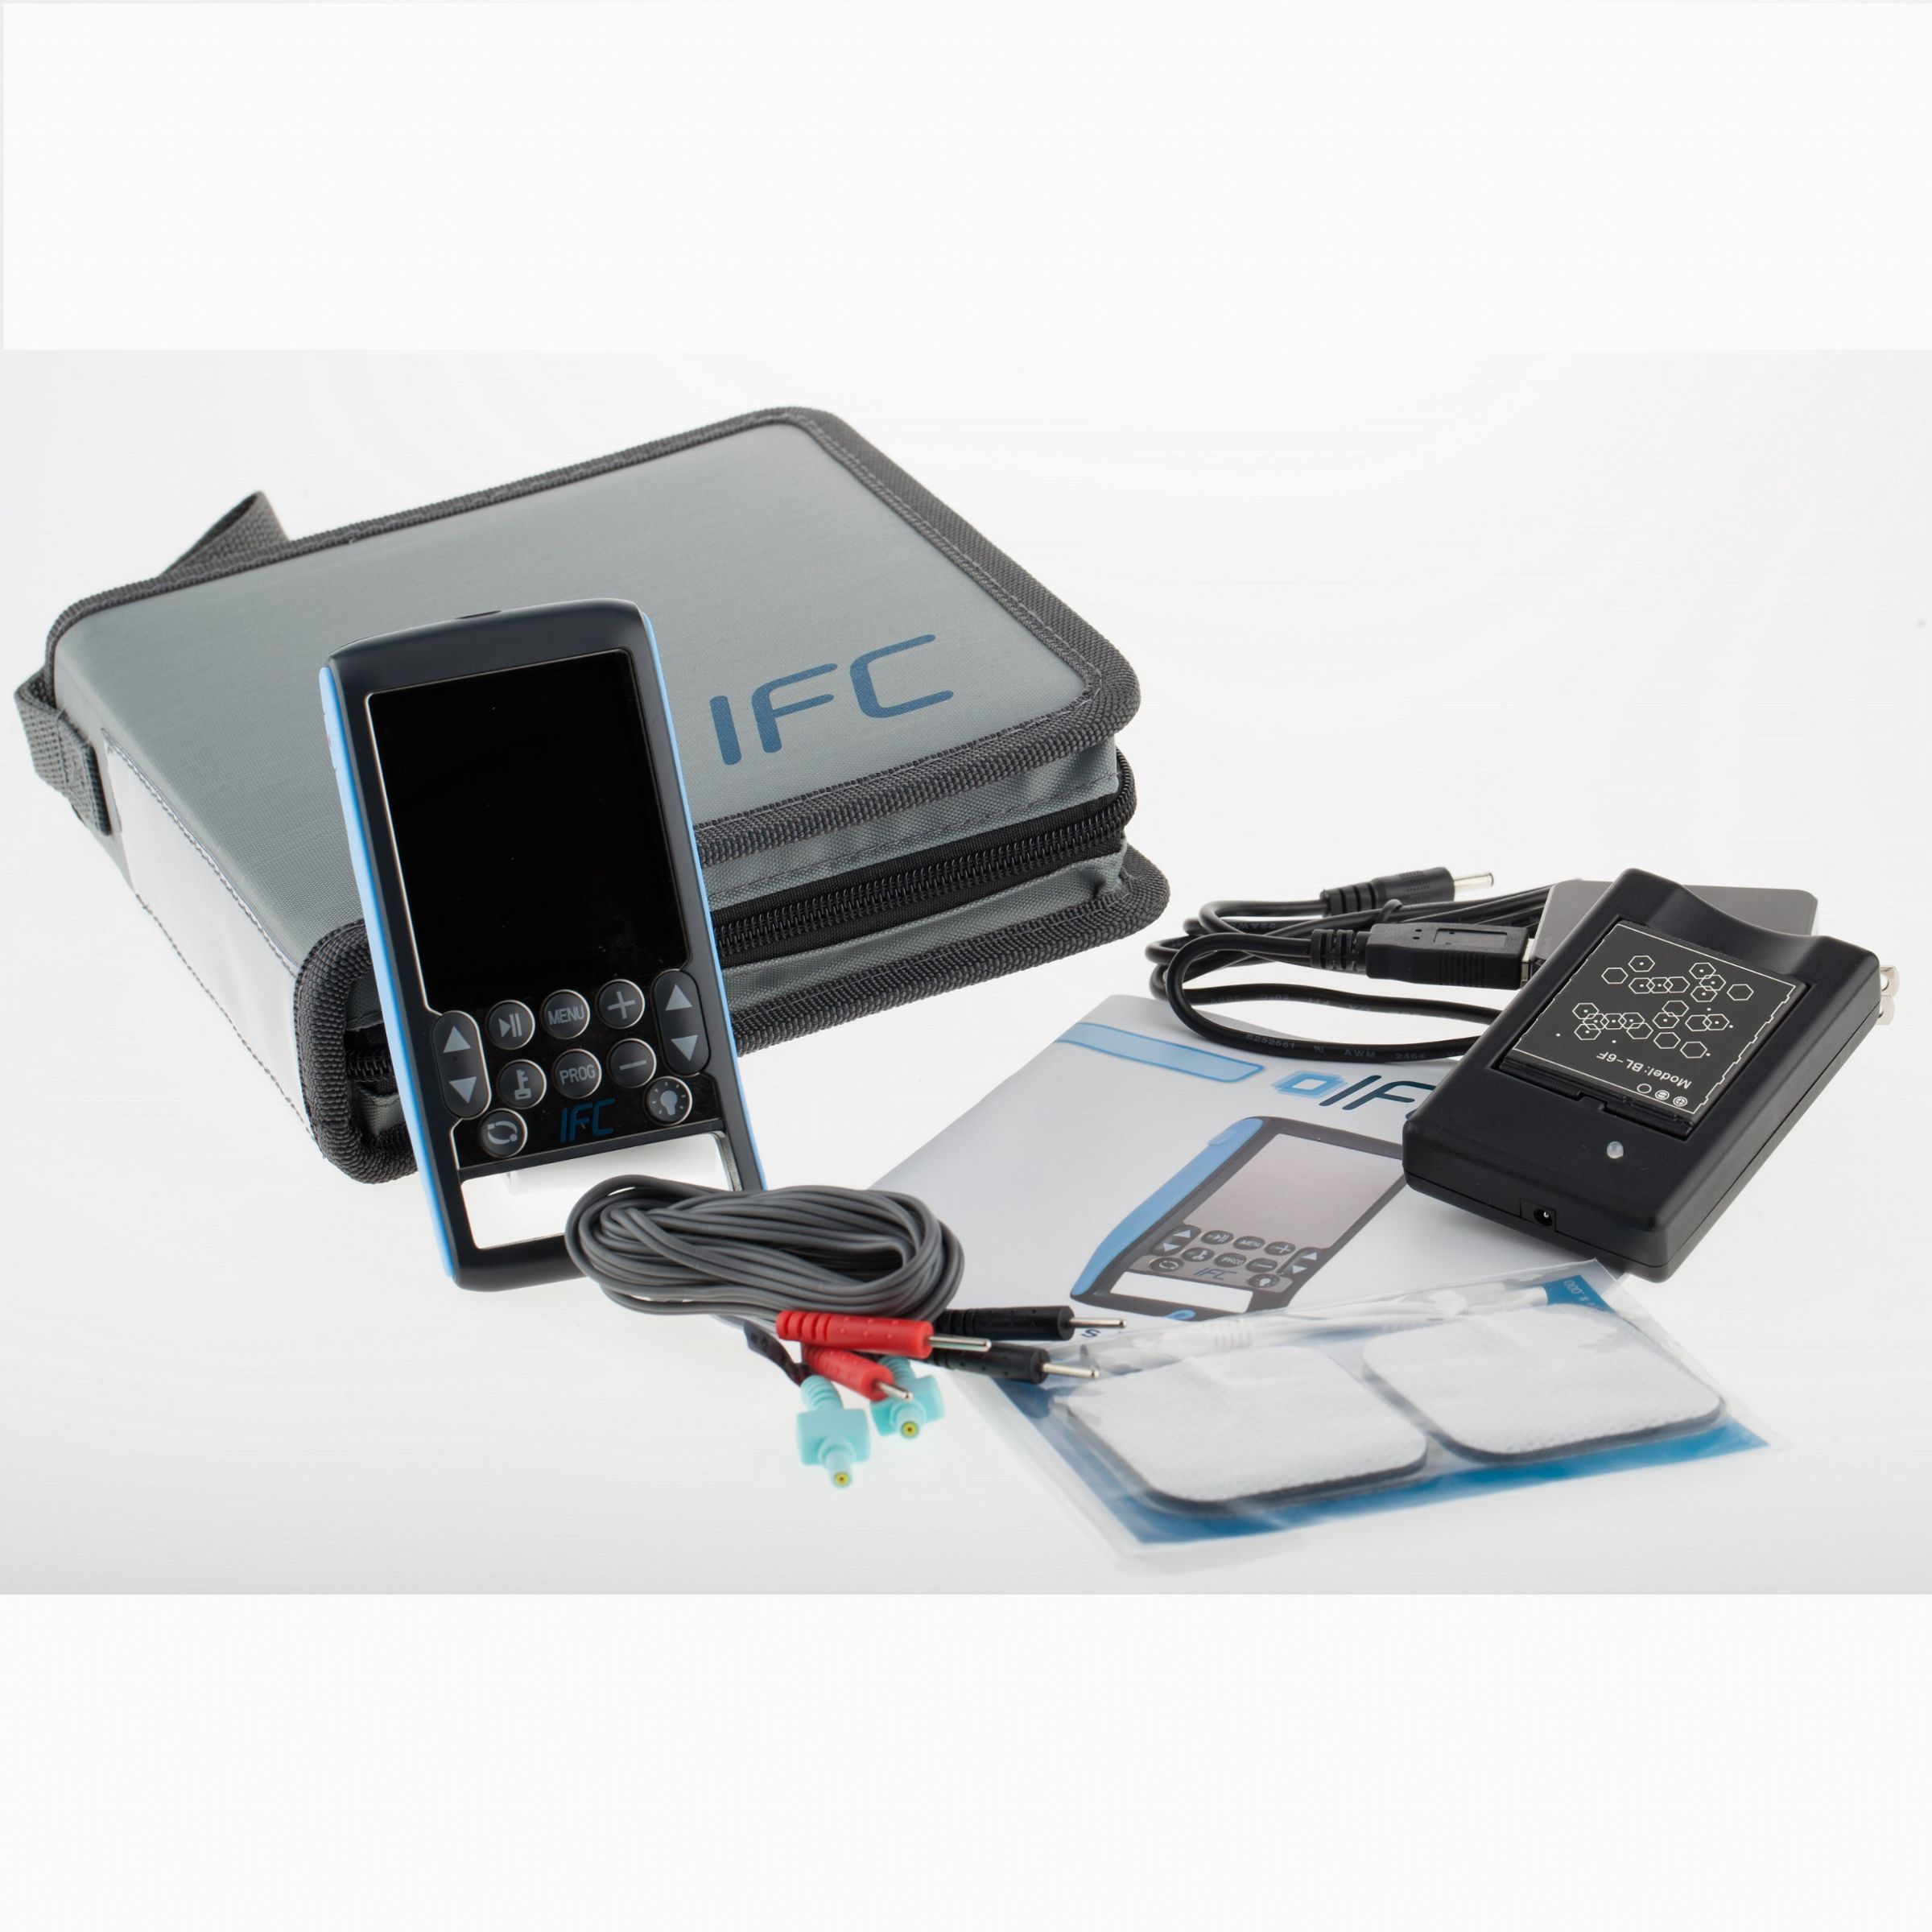 https://www.rehabmart.com/imagesfromrd/IFC4000_Electrotherapy_Interferential_Therapy_3.jpg